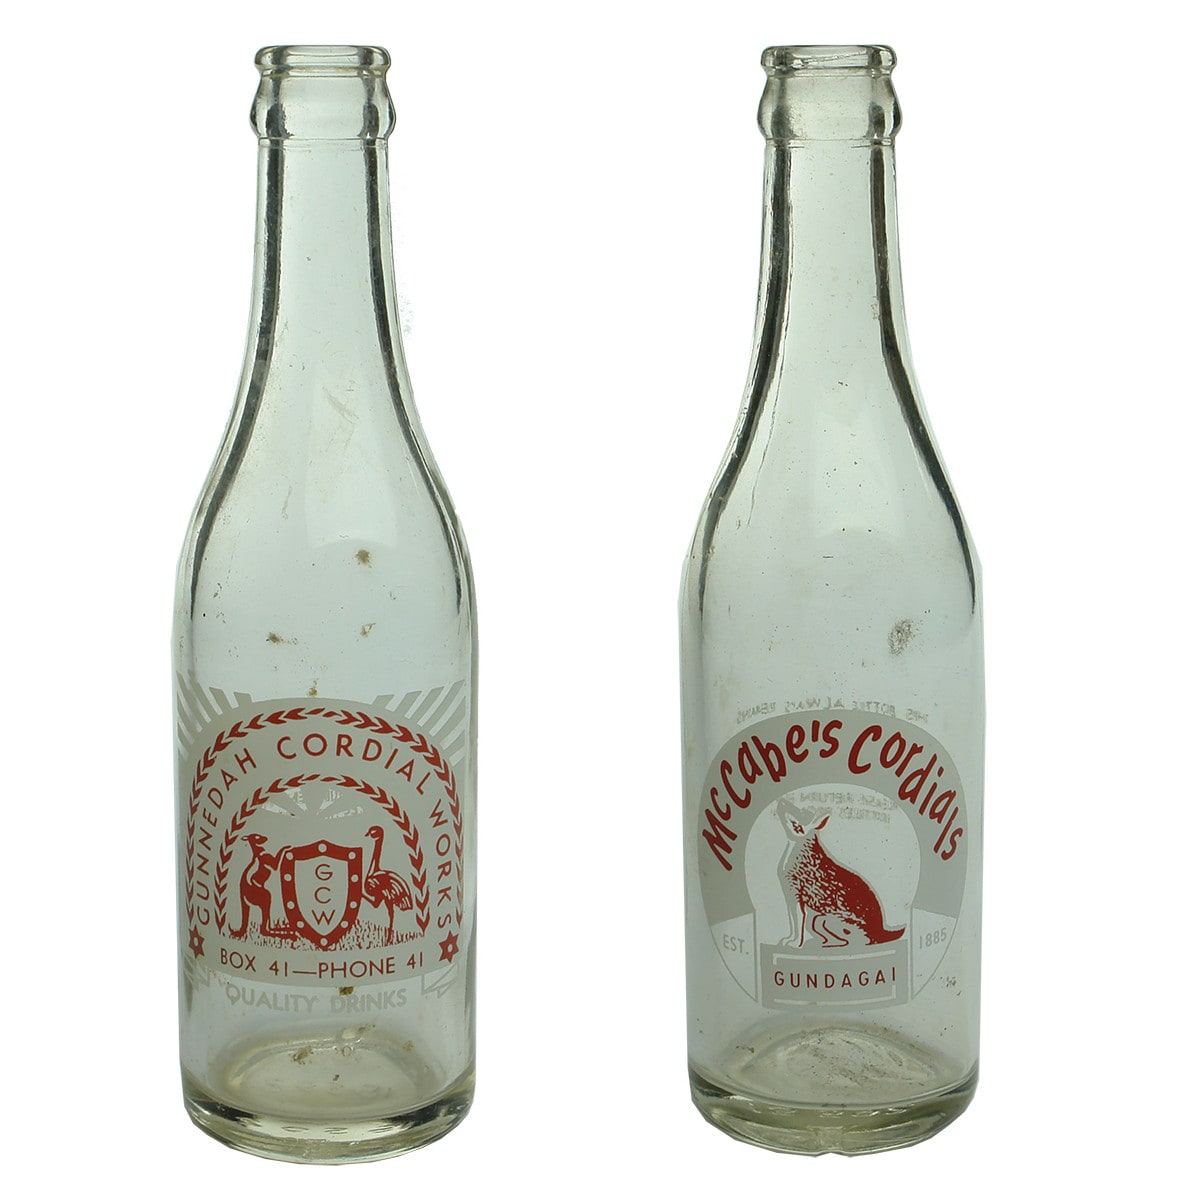 Pair of Ceramic Label Crown Seals. Classic Pictorial Gunnedah Cordial Works and McCabe's Cordials Gundagai. 10 oz. (New South Wales)